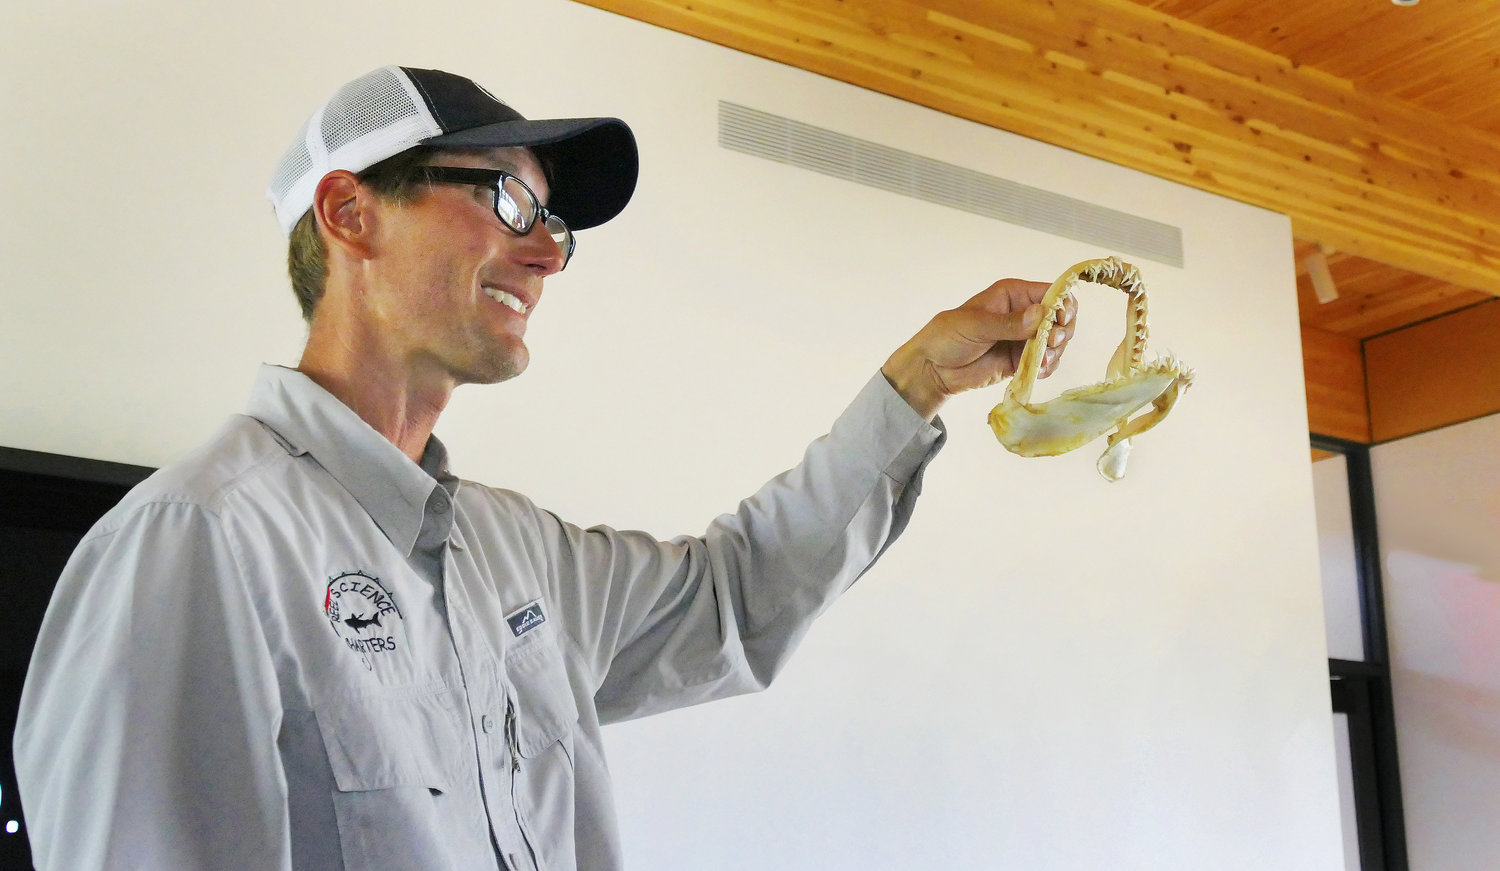 Greg Metzger shows the Shark Jaw & Teeth during a special presentation at the Jones Beach Energy and Nature Center on August 6.